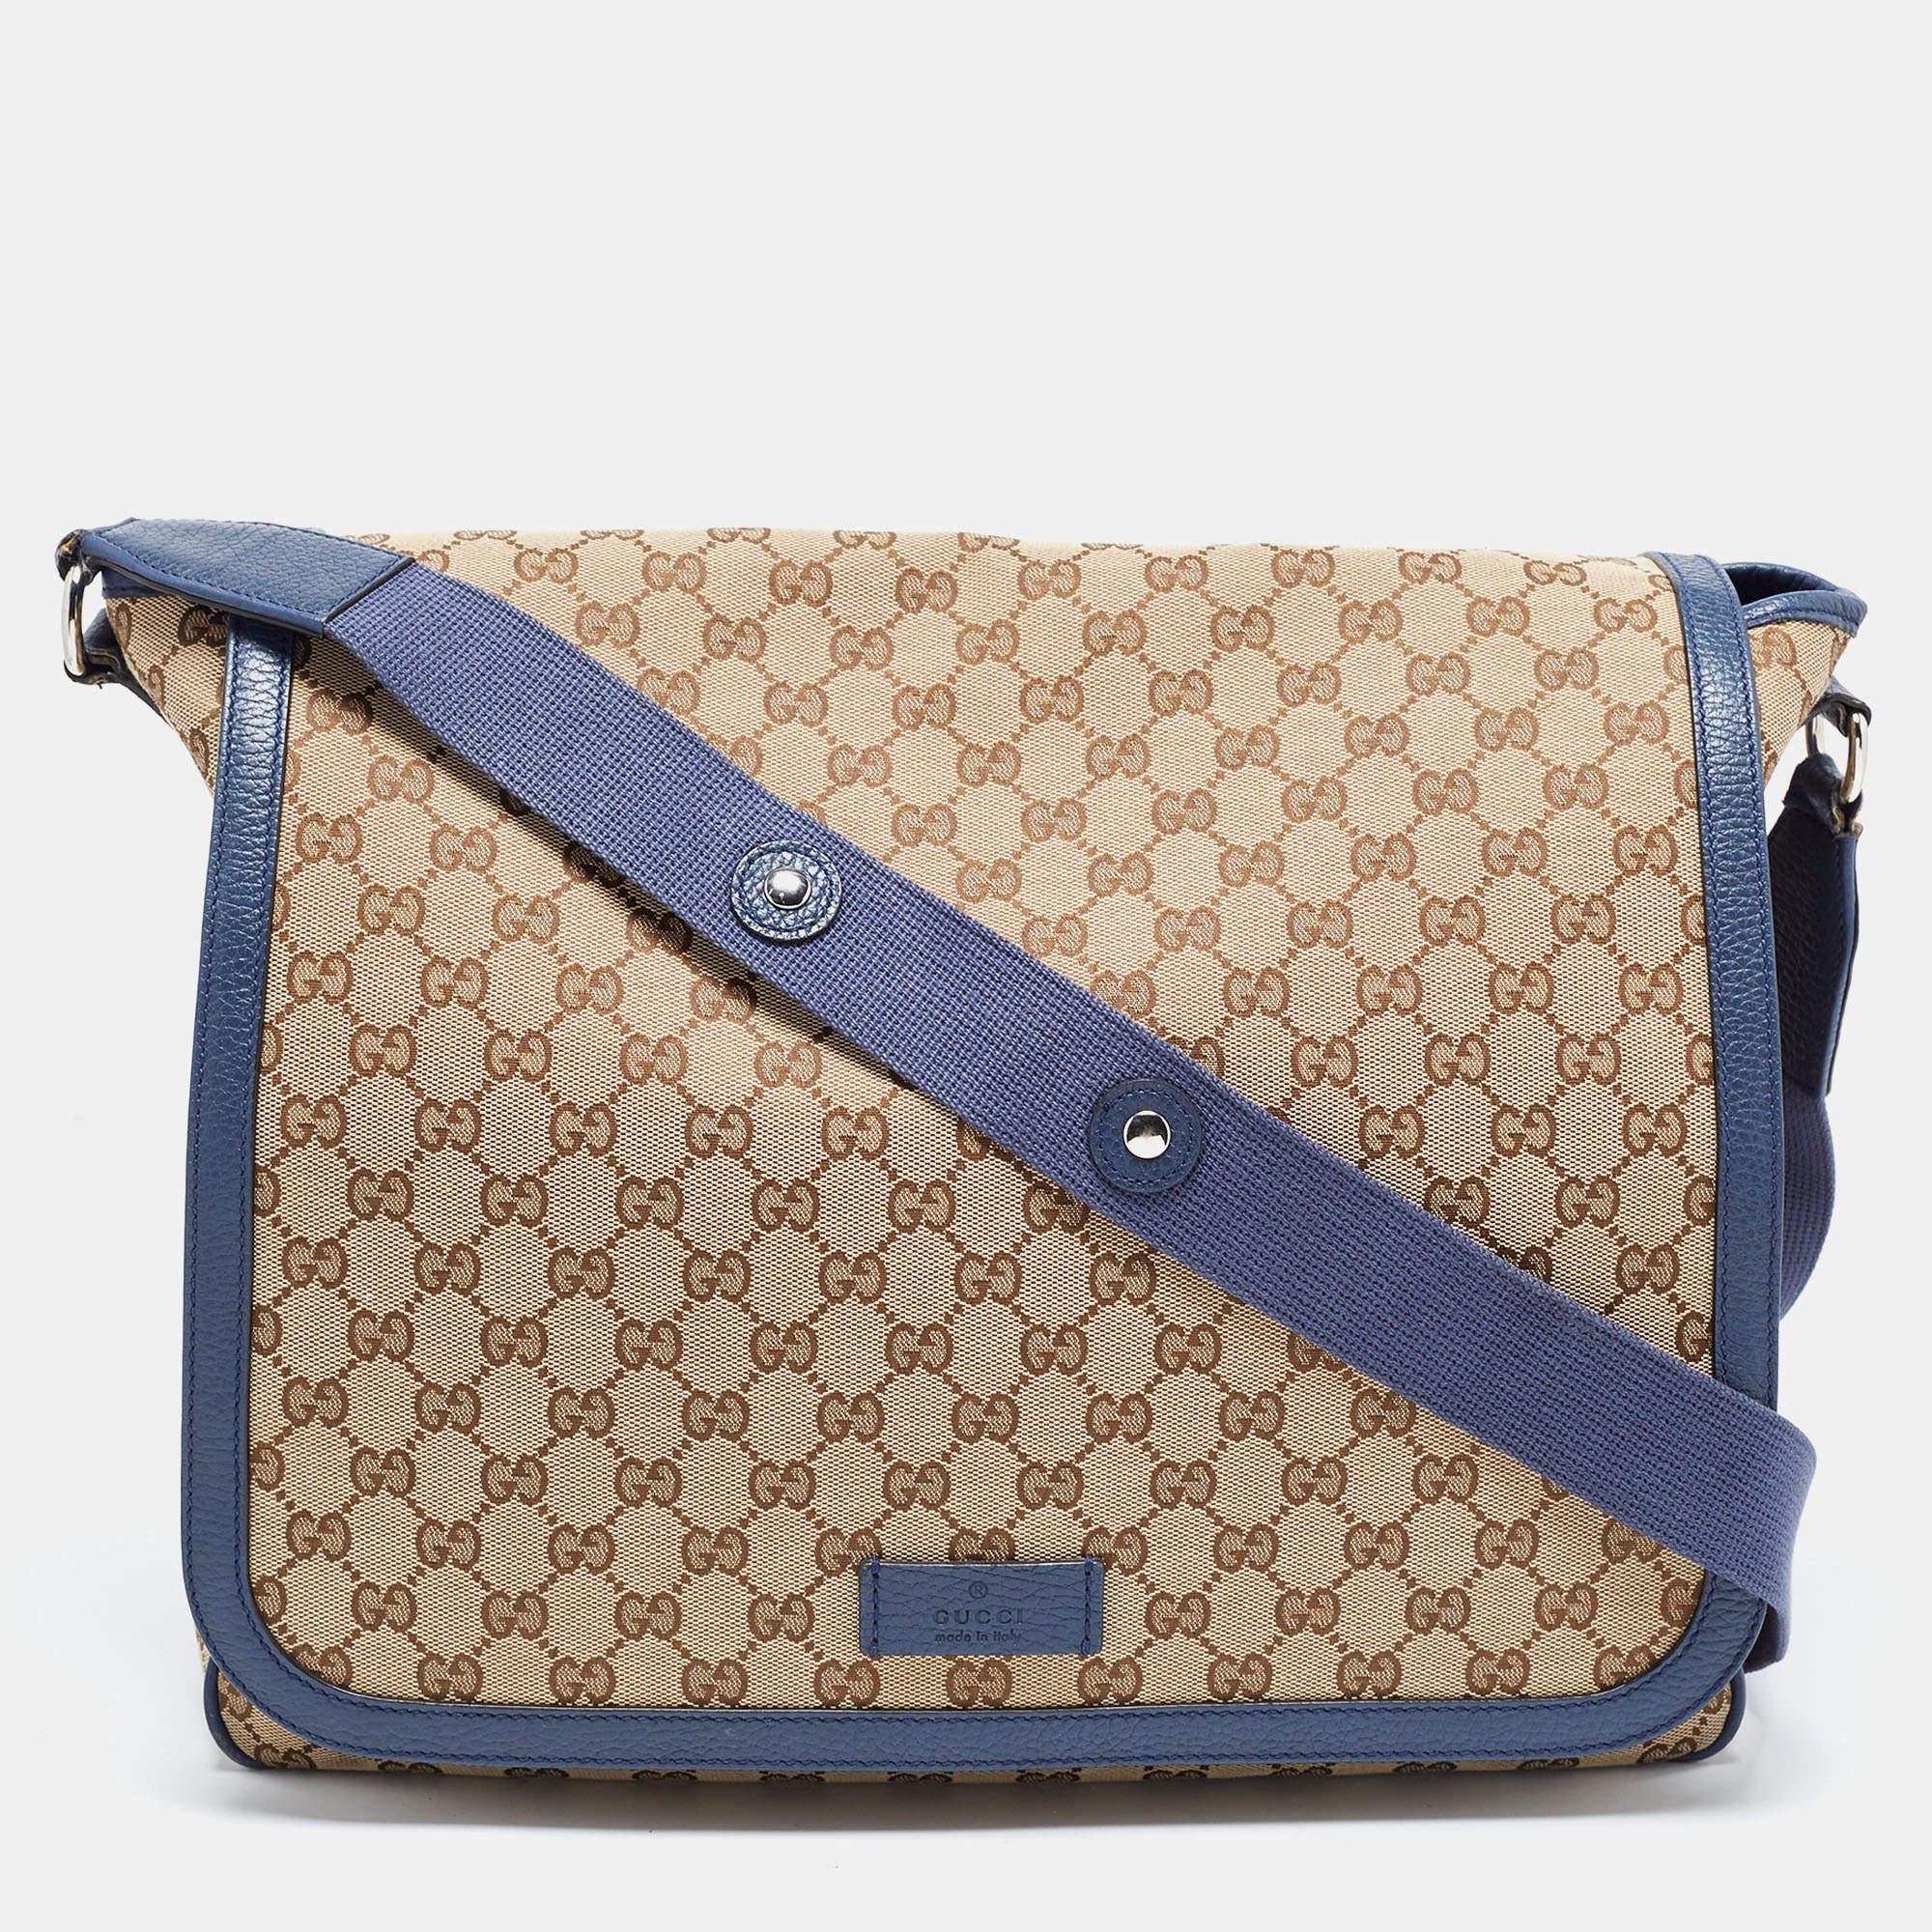 Gucci Beige/Blue GG Canvas and Leather Messenger Diaper Bag 7